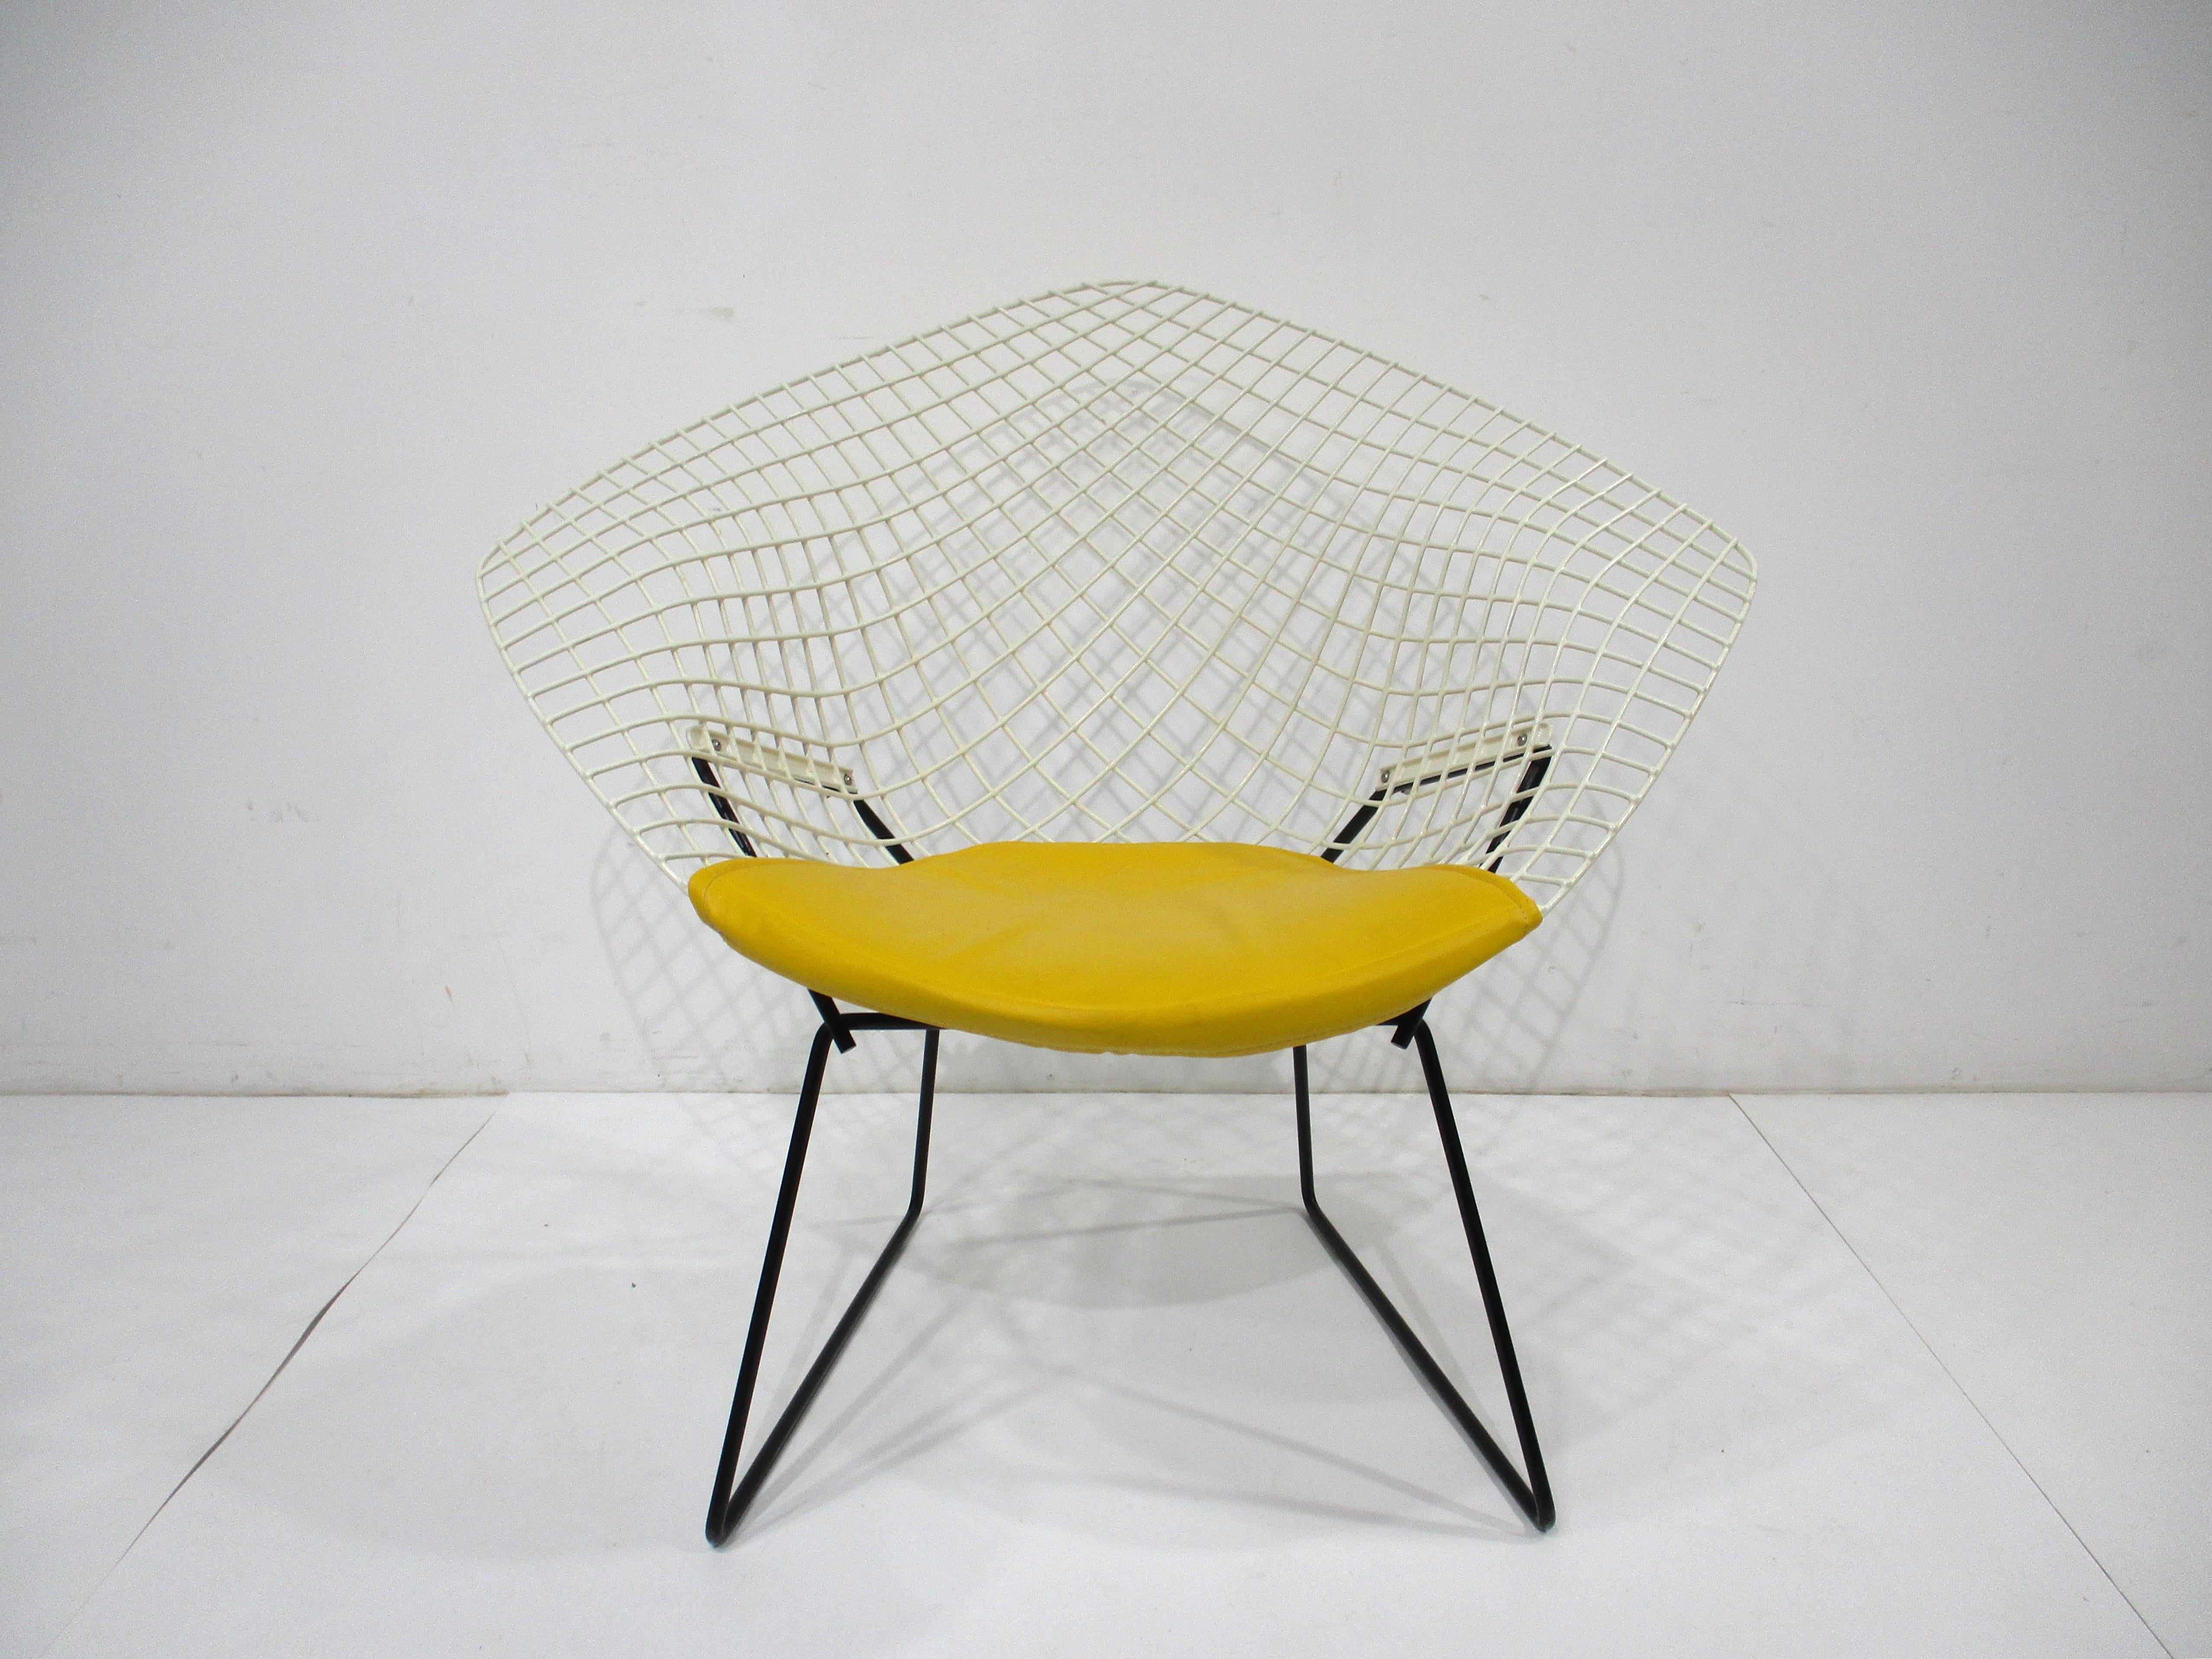 A white plastic coated welded wire diamond lounge chair with a contrasting satin black base and sunflower yellow leatherette seat pad . Manufactured by Knoll International and designed by iconic artist , furniture designer and architect Harry